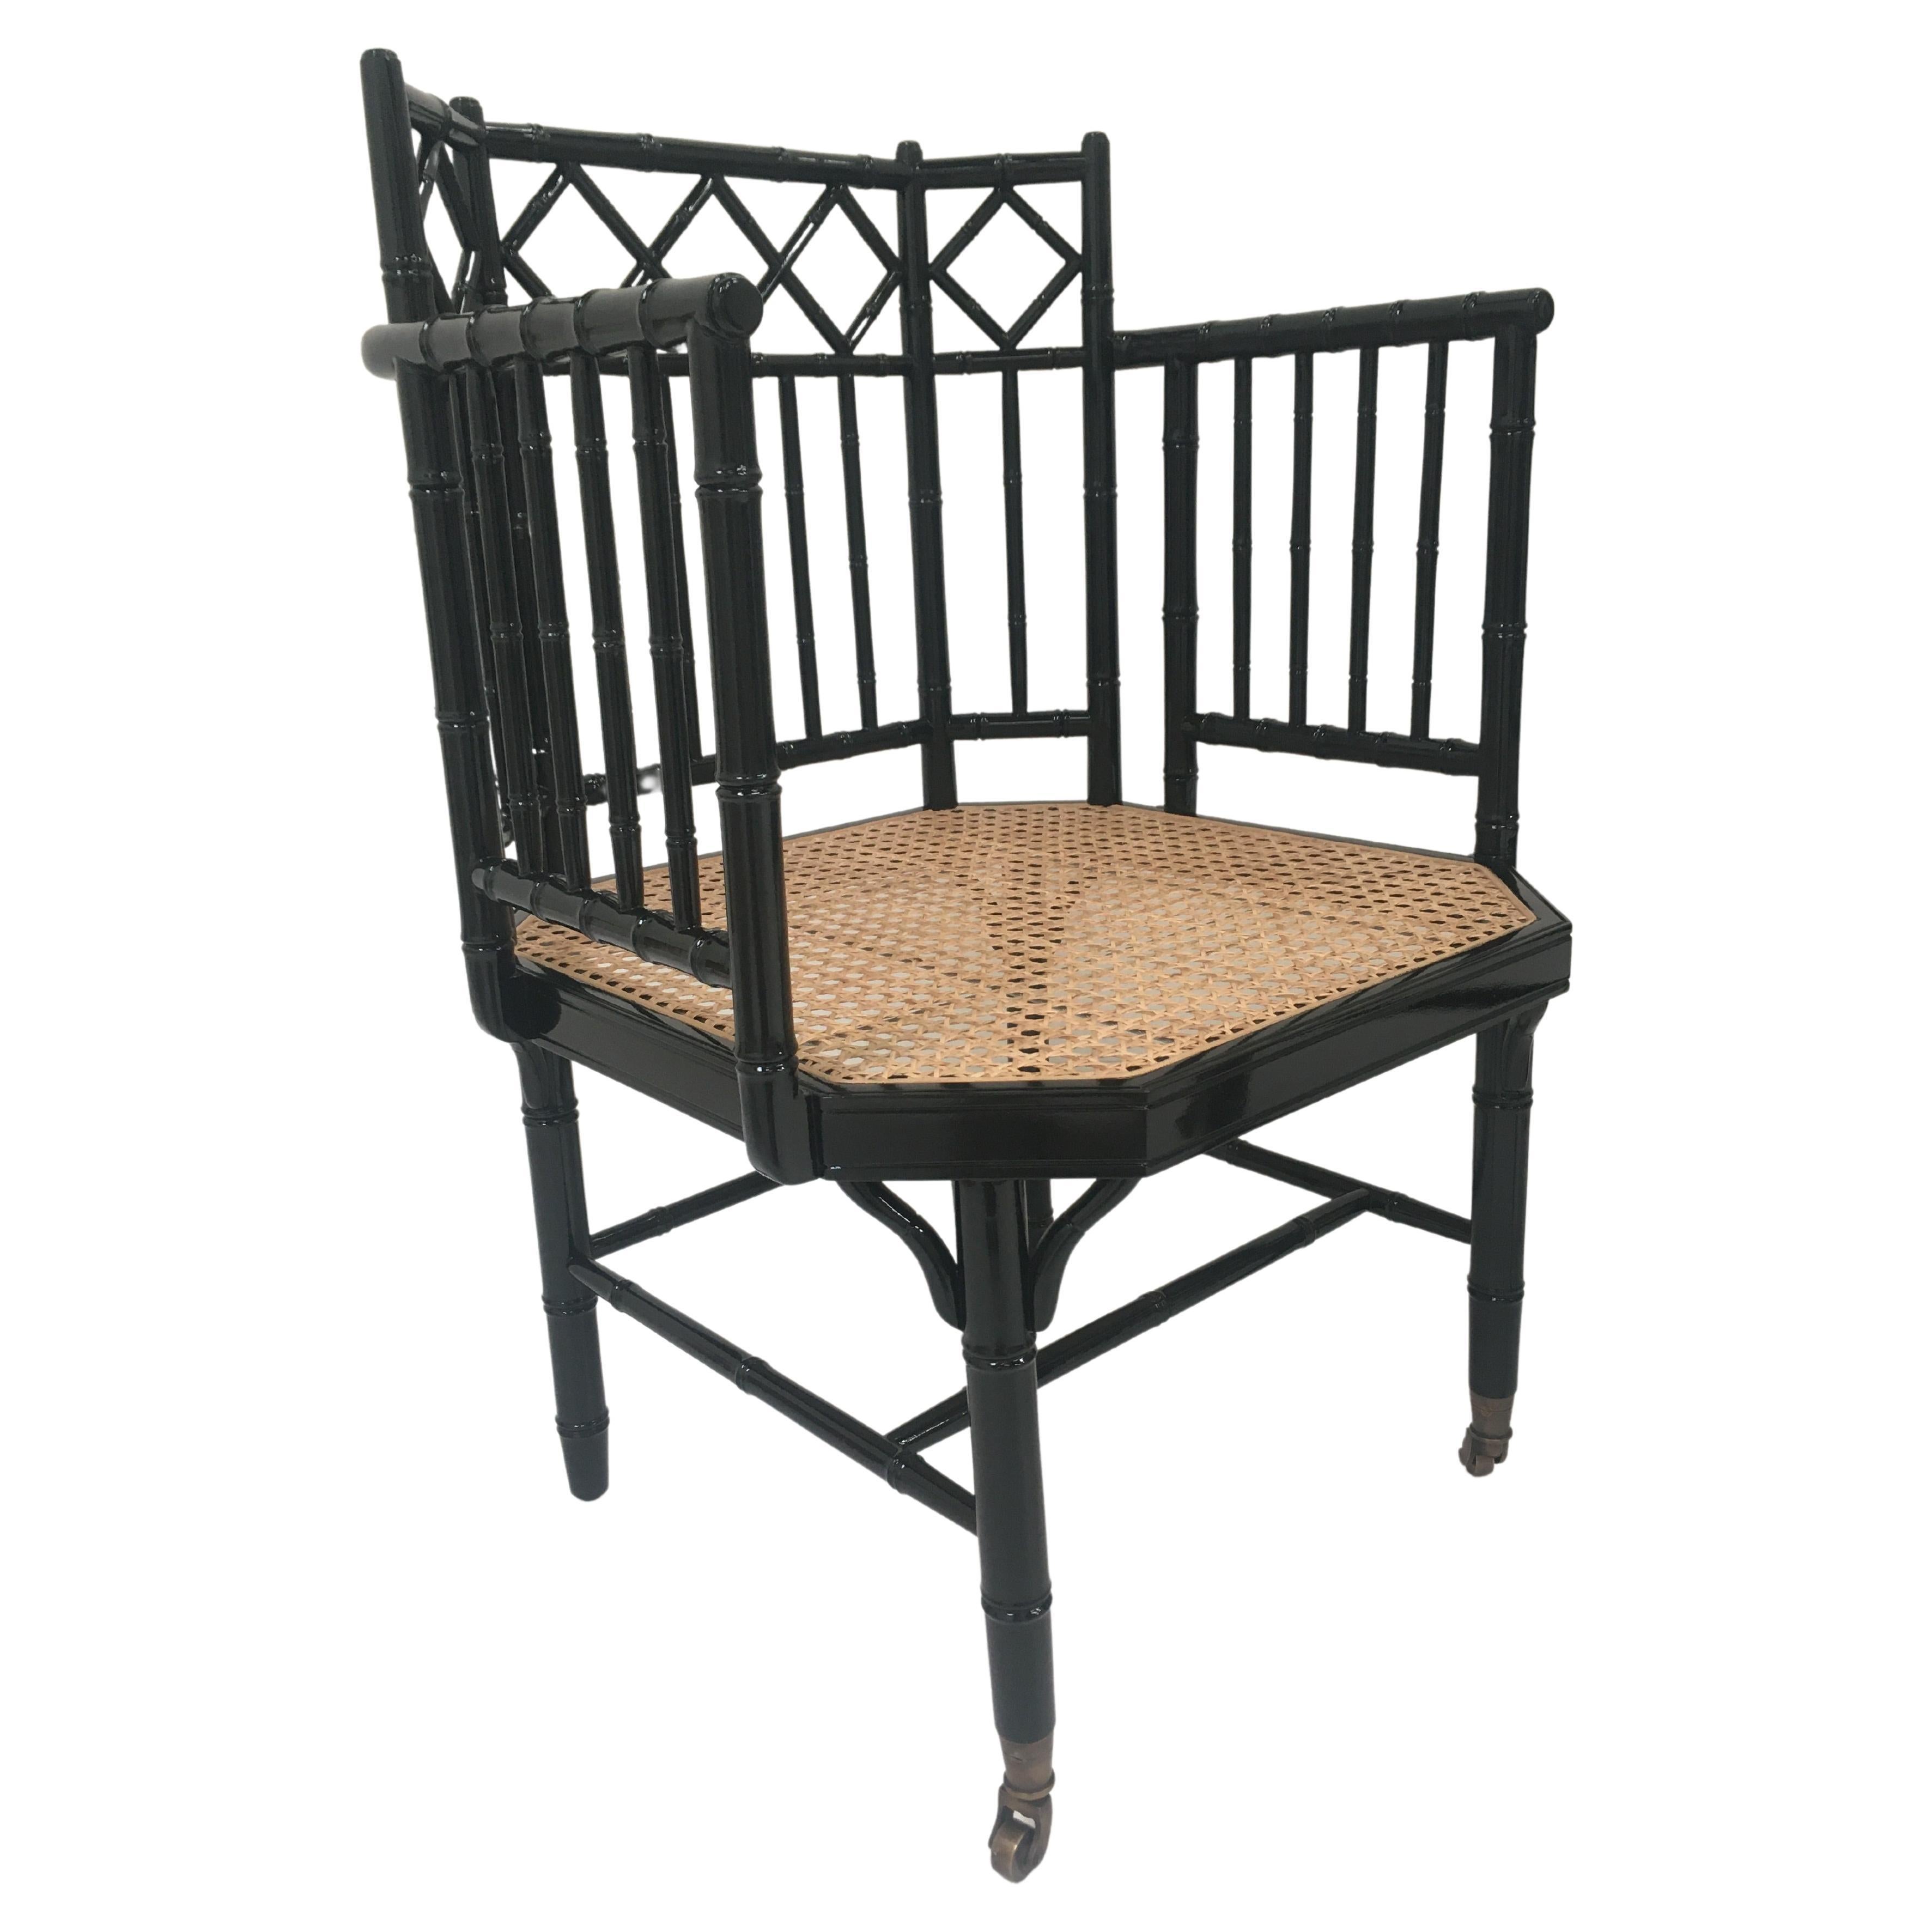 Black Lacquer Wooden Bamboo Effect Cane Seat and Brass Finishes Chair